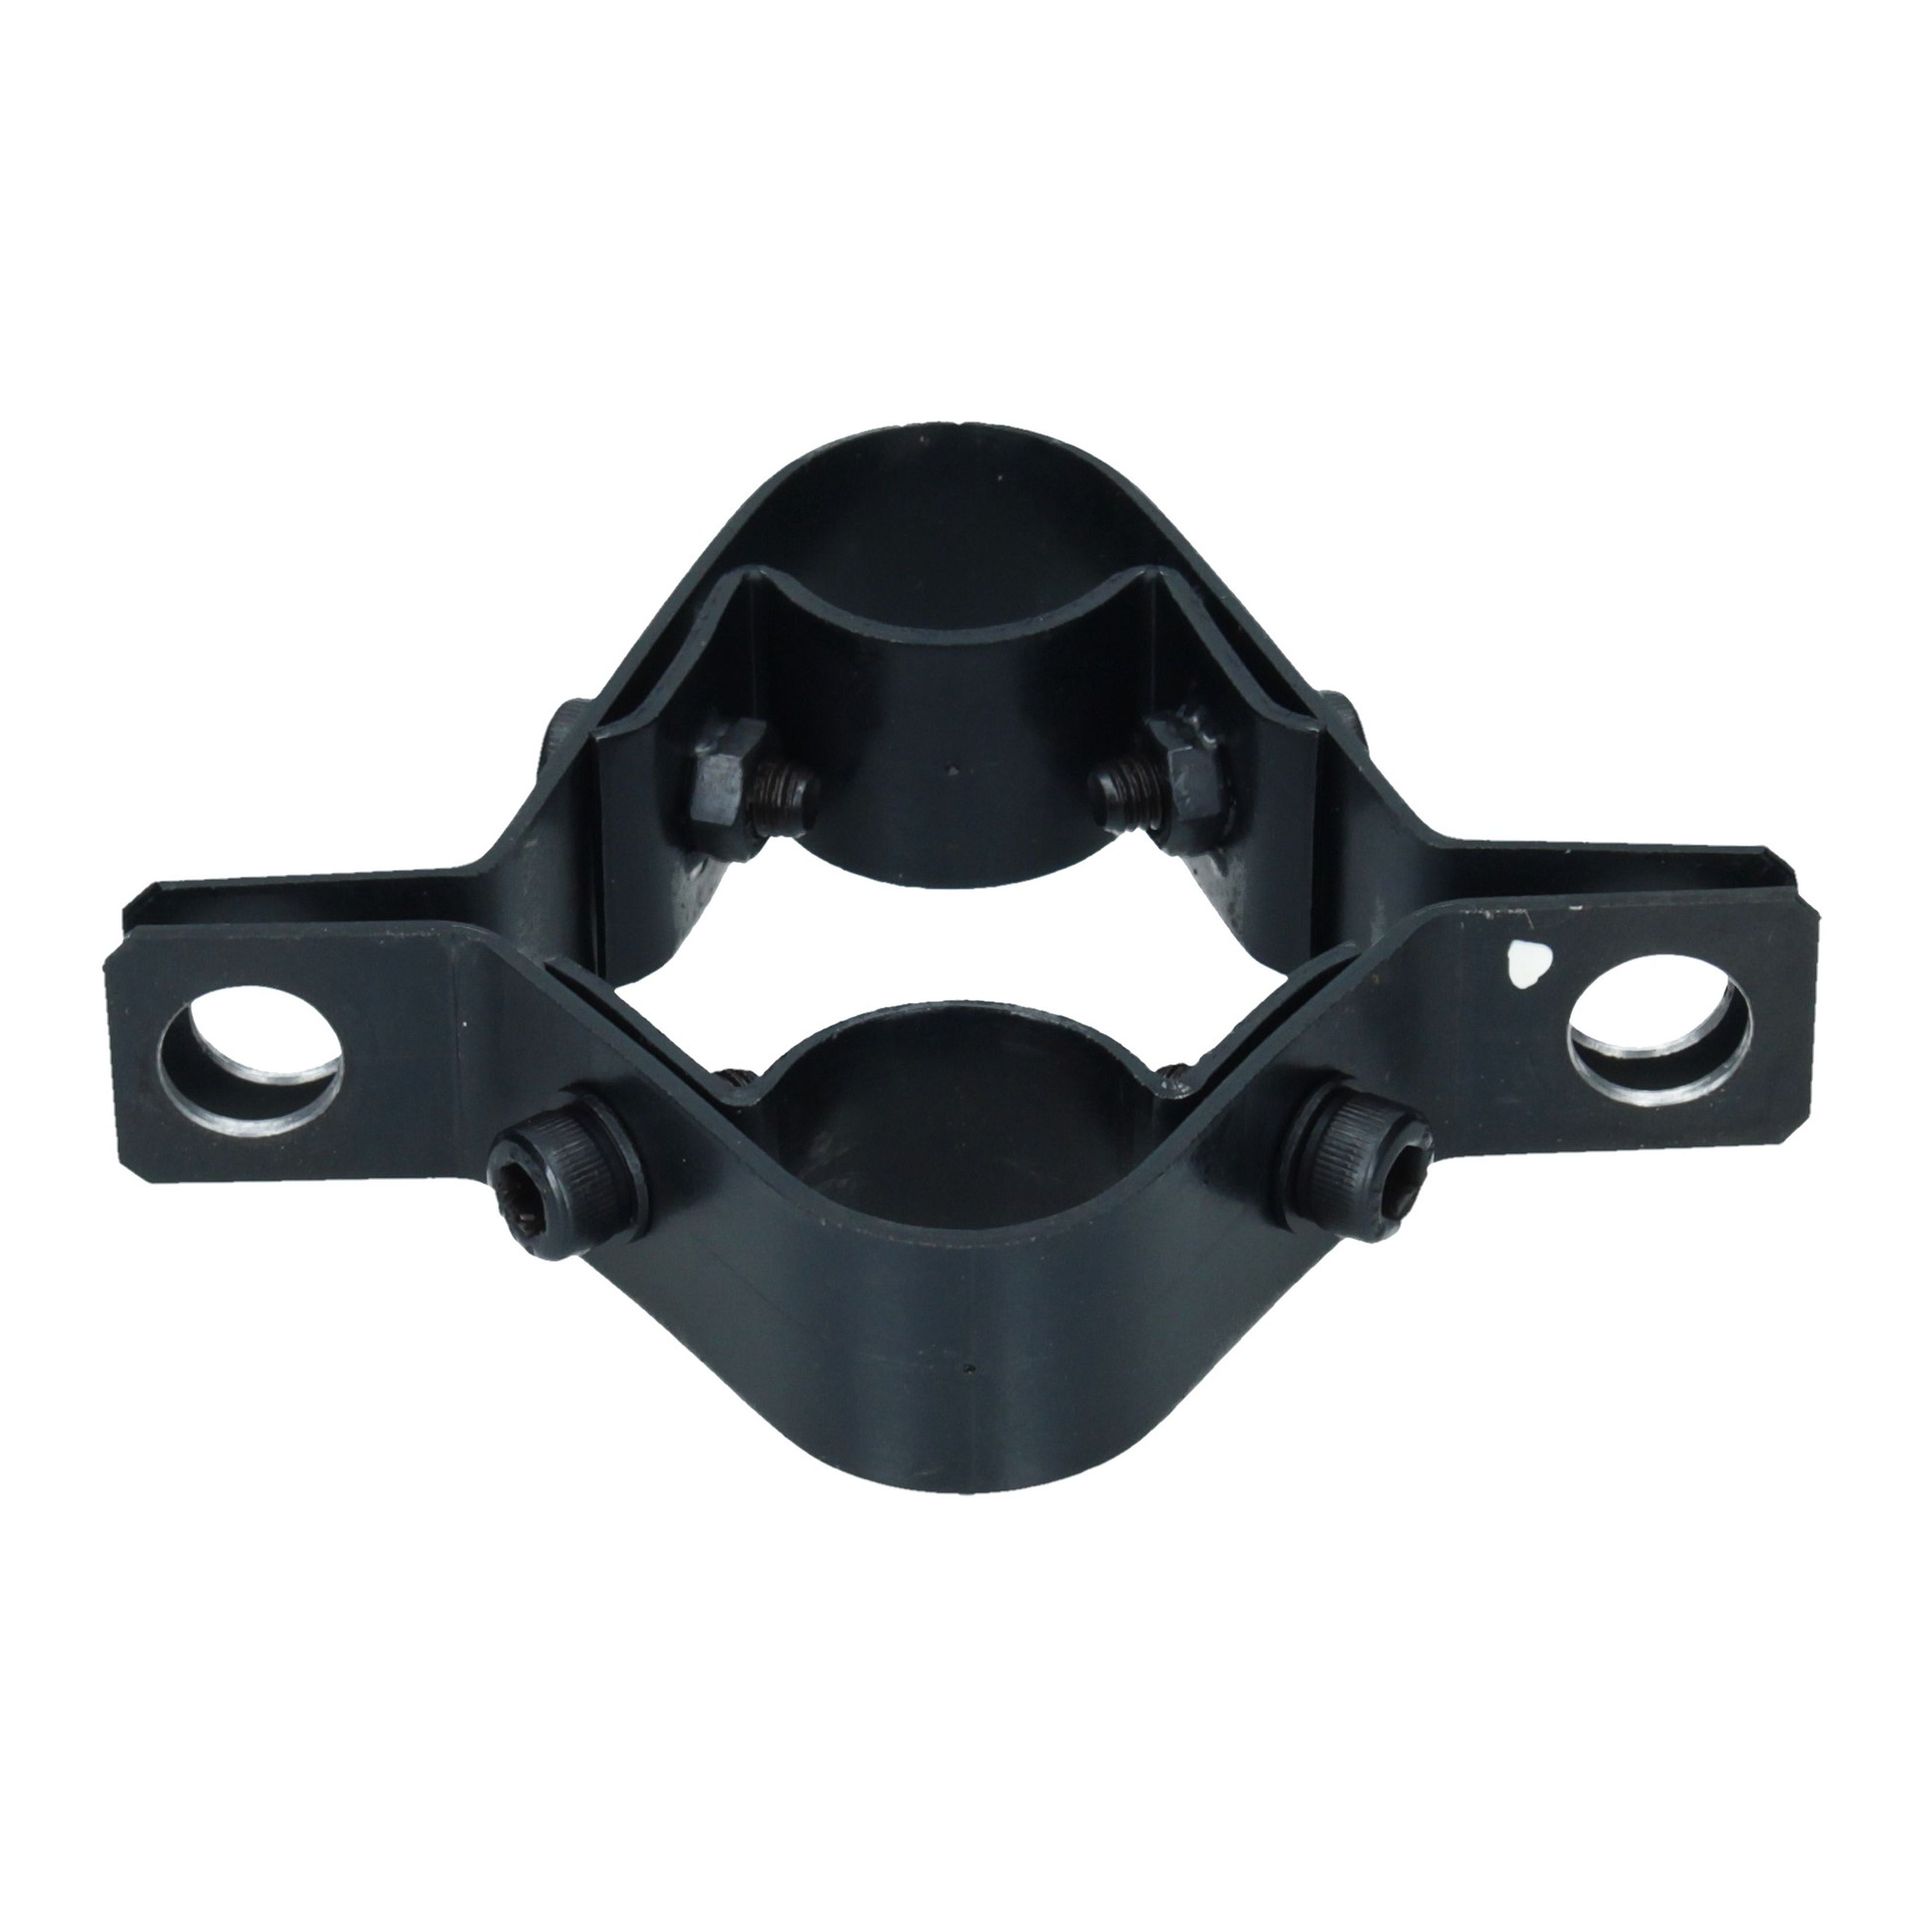 Oil Pick Up Pipe Clamp Set (4 Part Set)